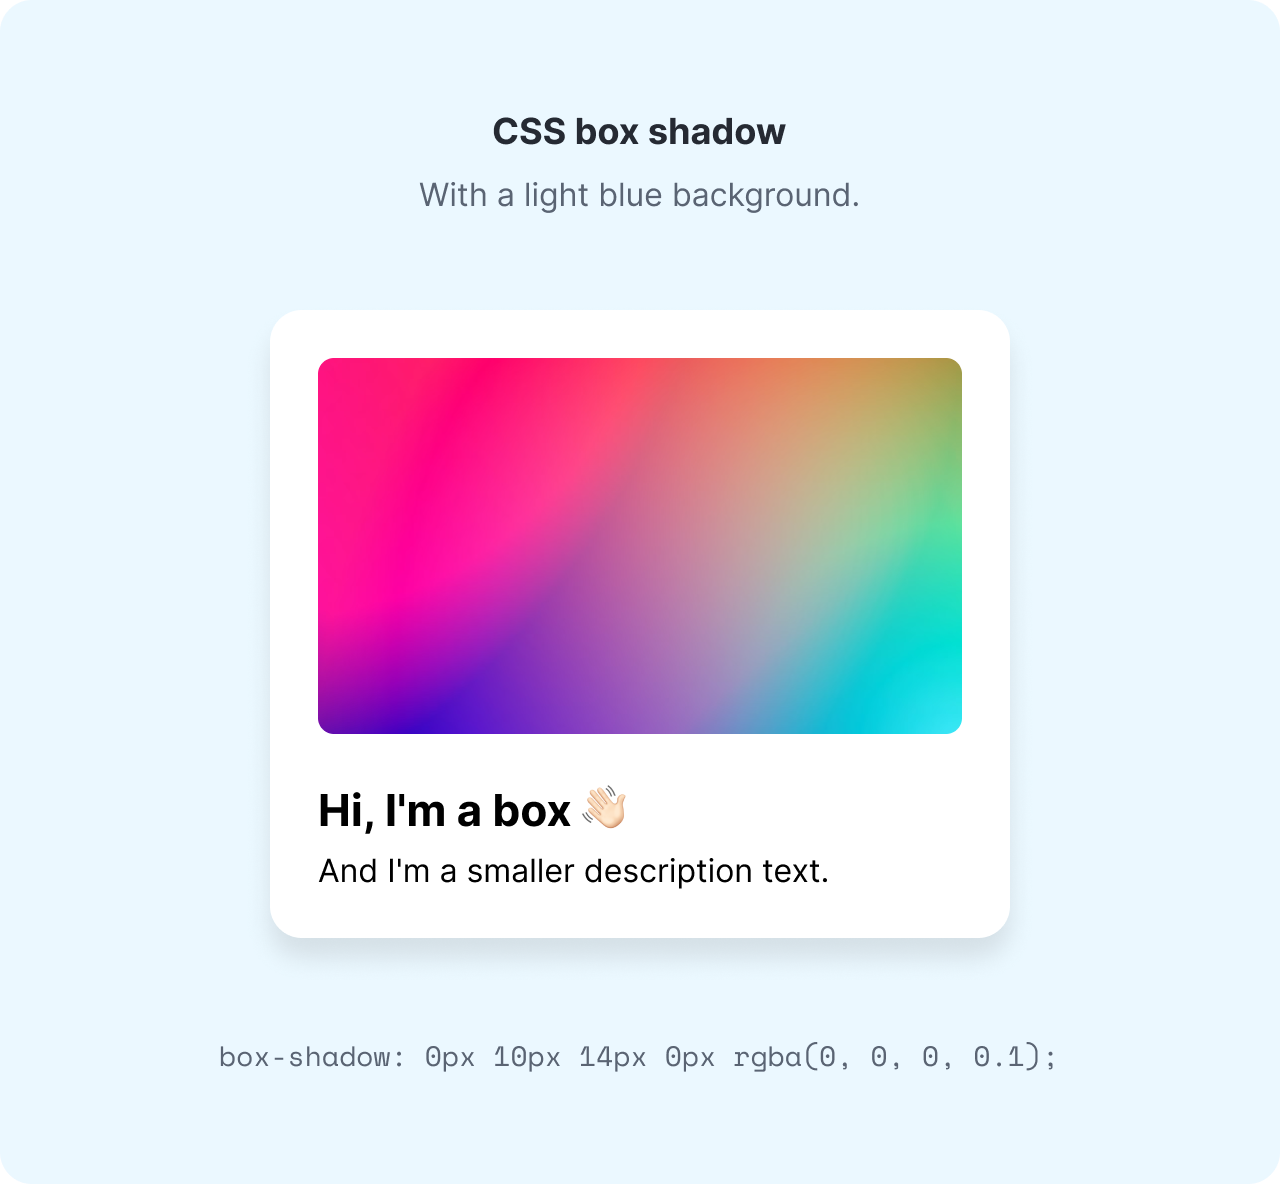 A box shadow in CSS